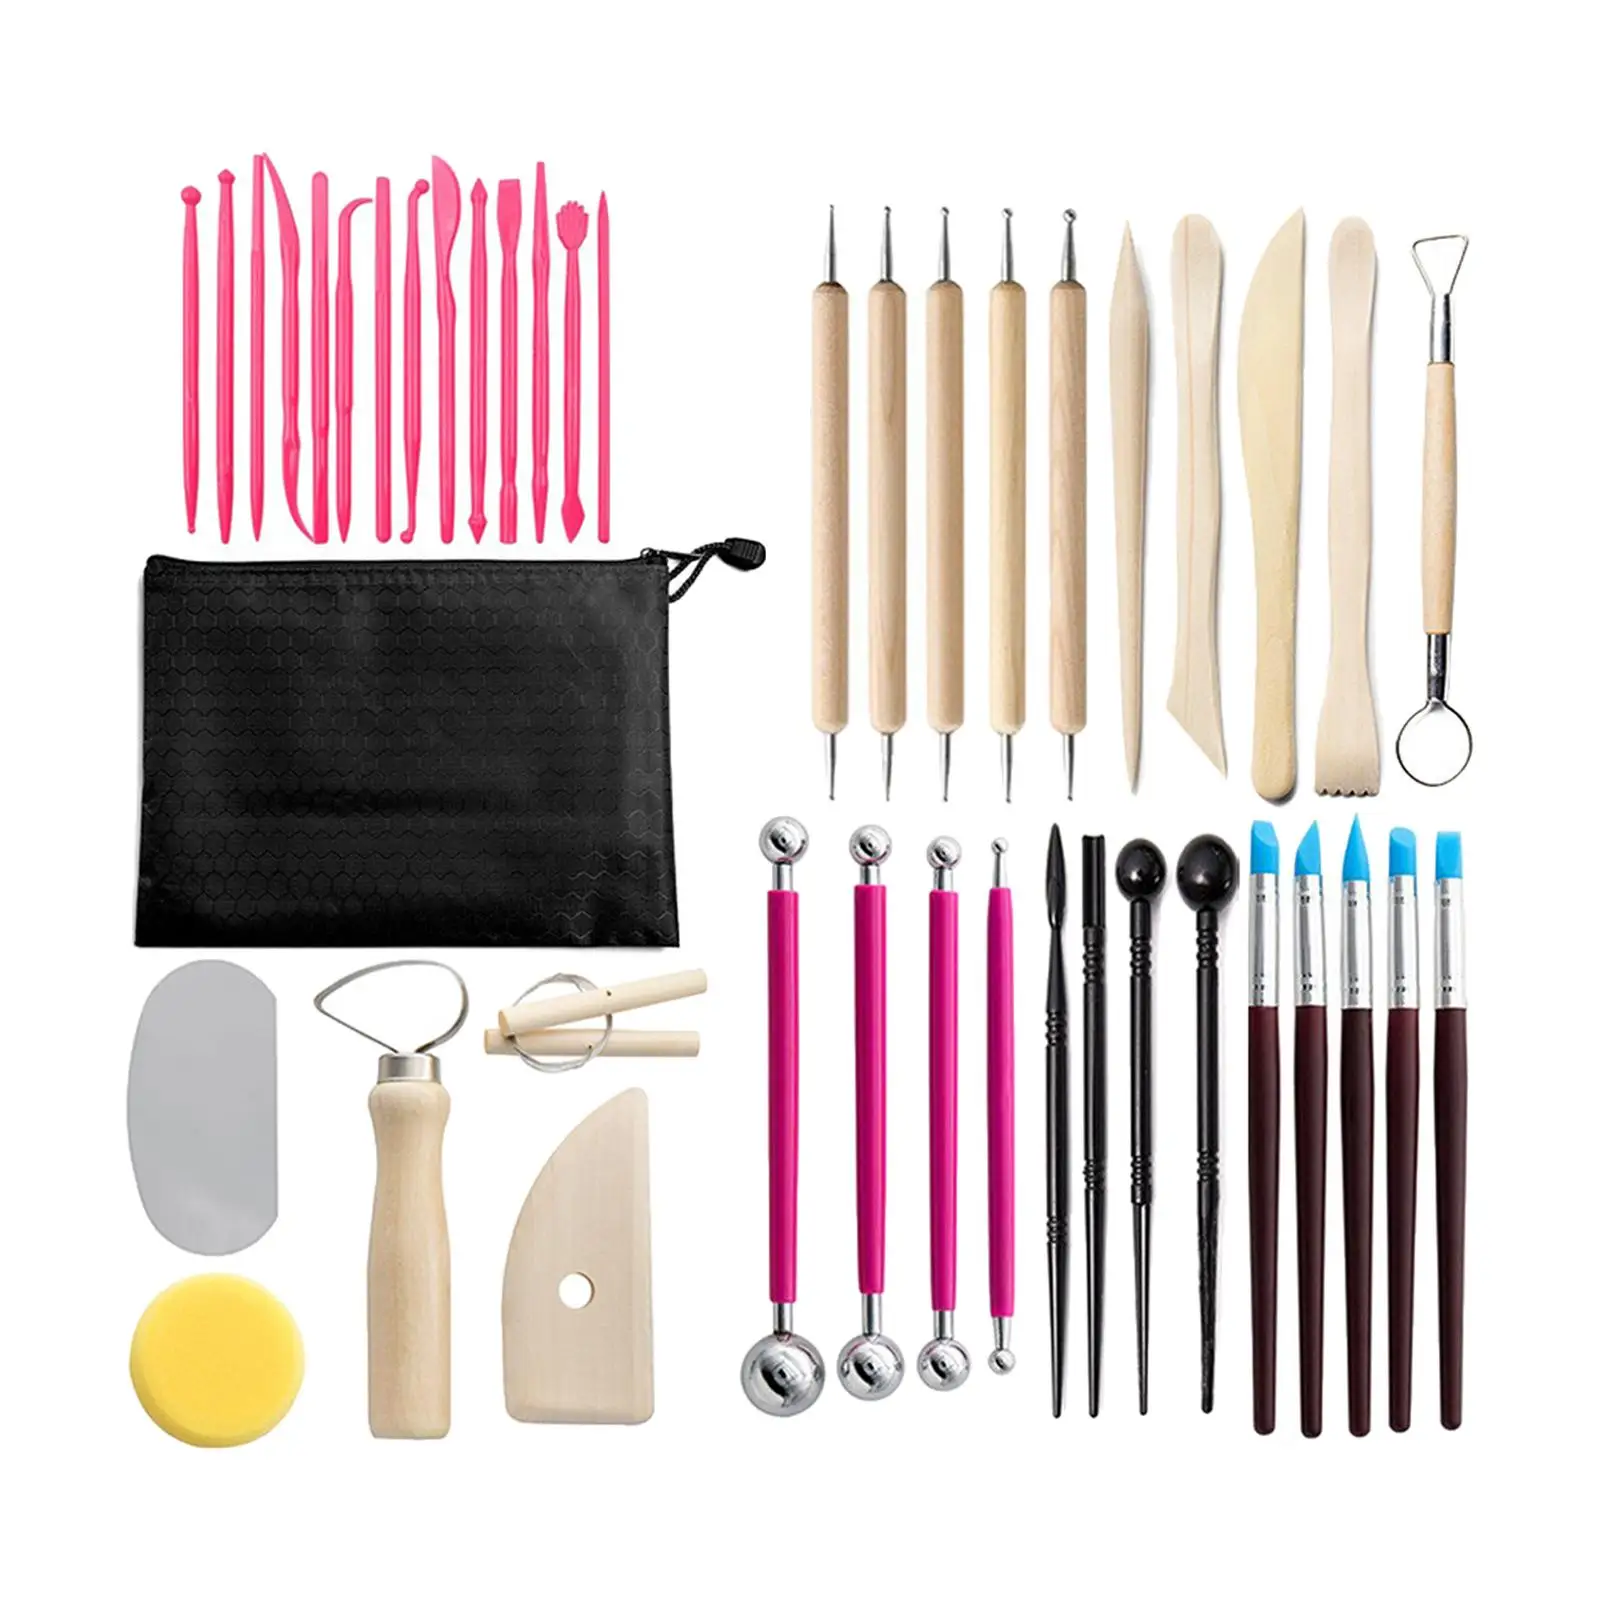 42pcs Clay Sculpting Set Carving Kit Wooden for Modelling Dotting Cutting Beginners Clay